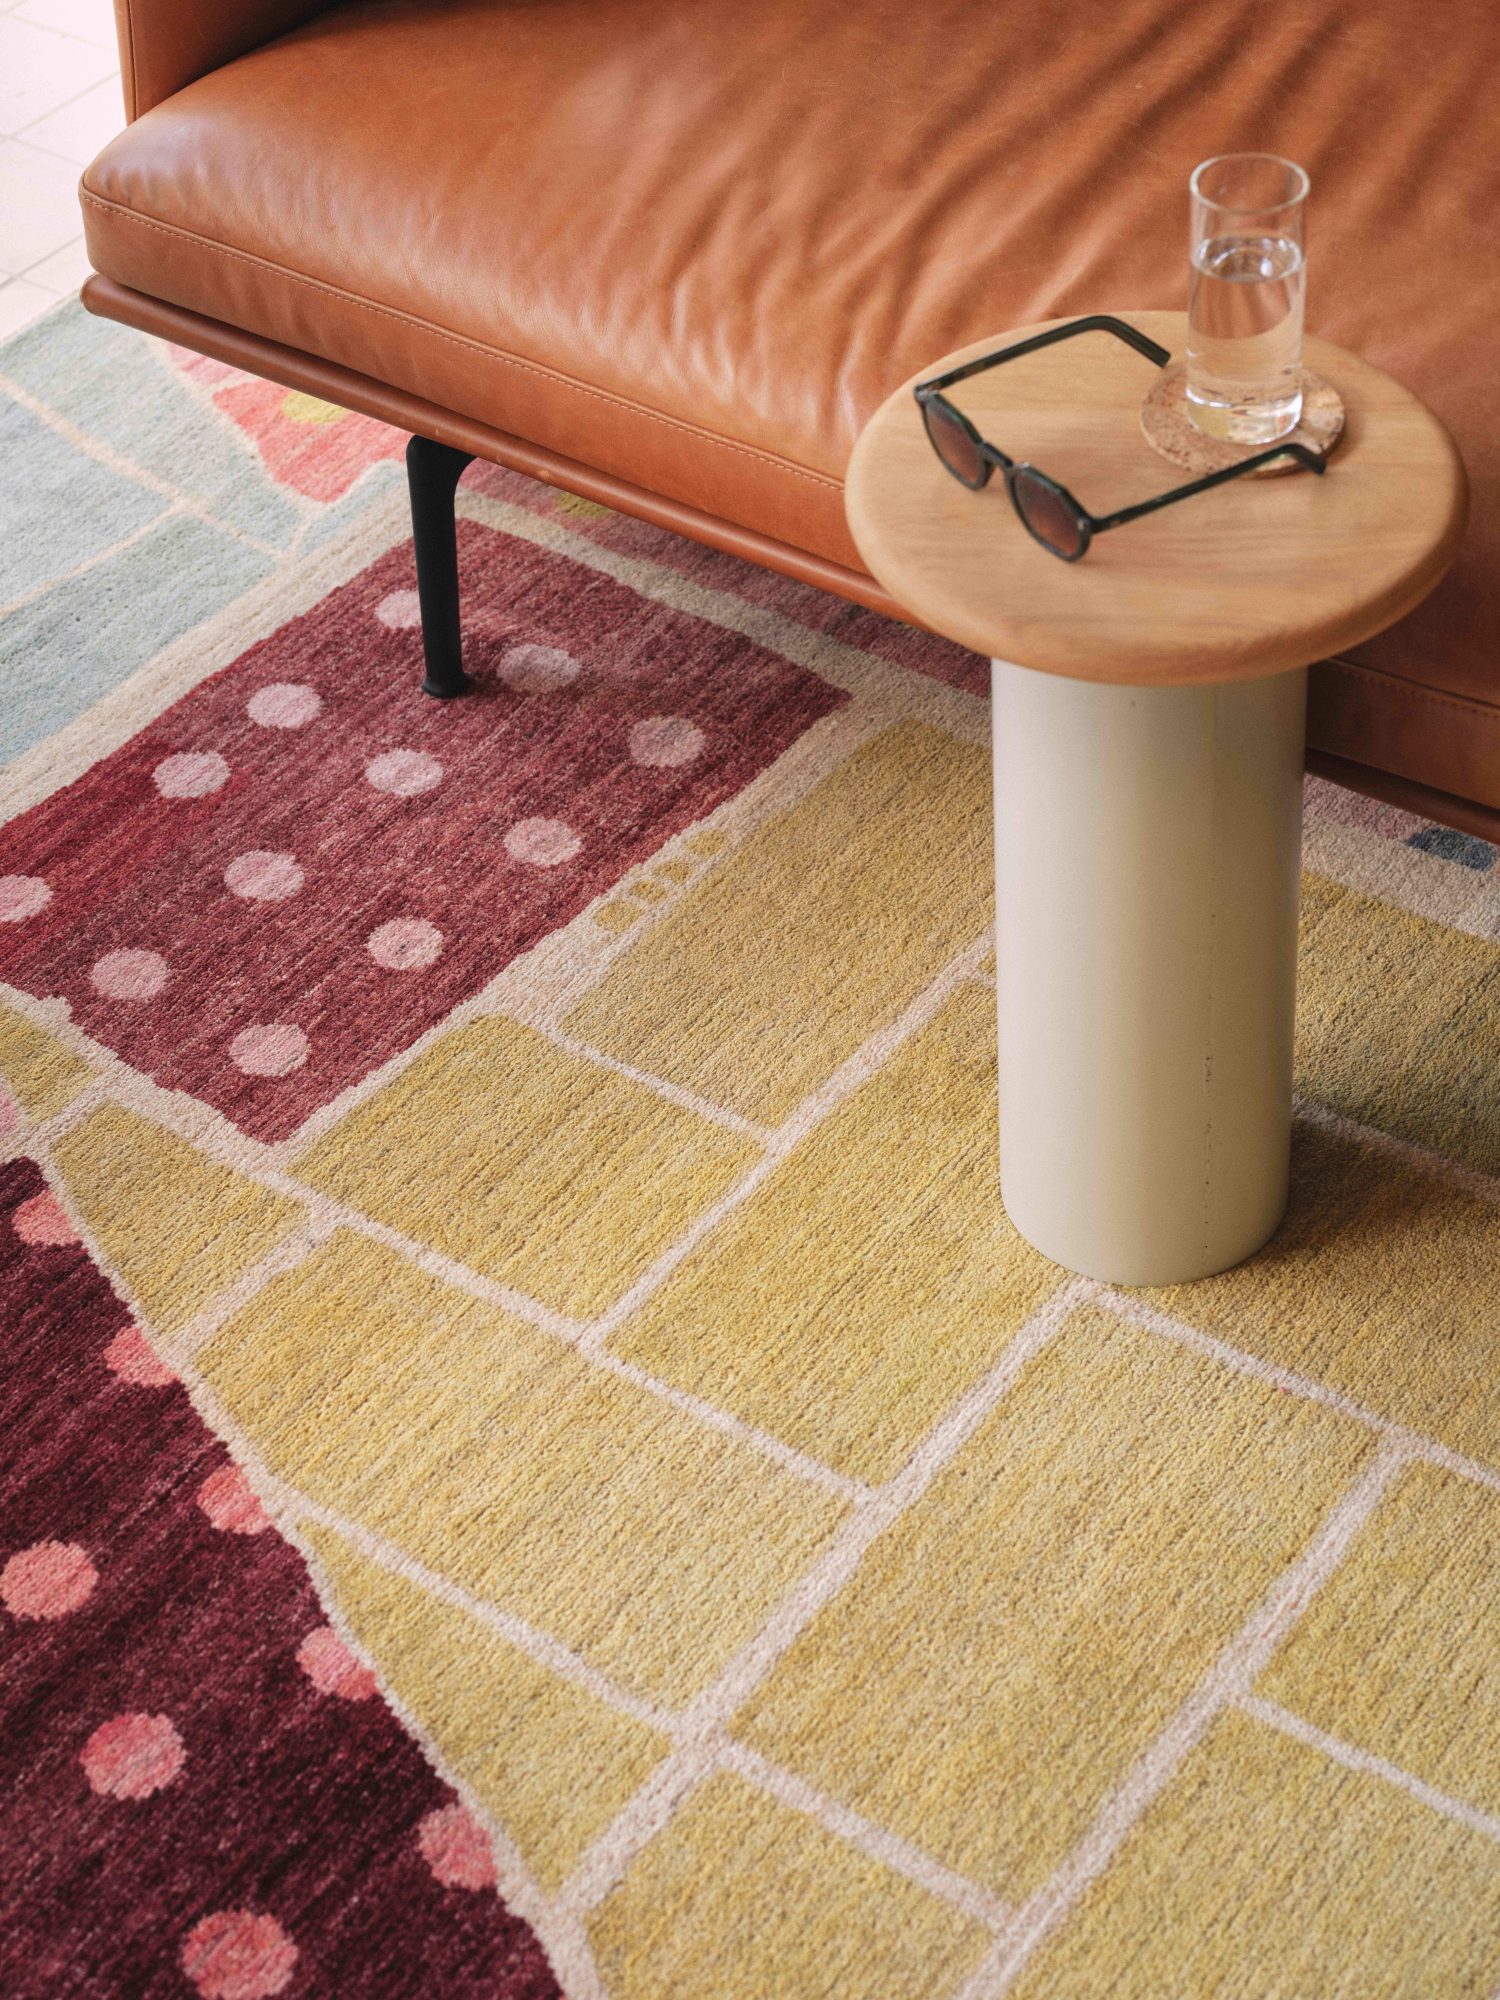 The textural Inset hand knotted rug from the Verso collection features layered brickwork and dotted squares in complimentary pink, green and blue tones.